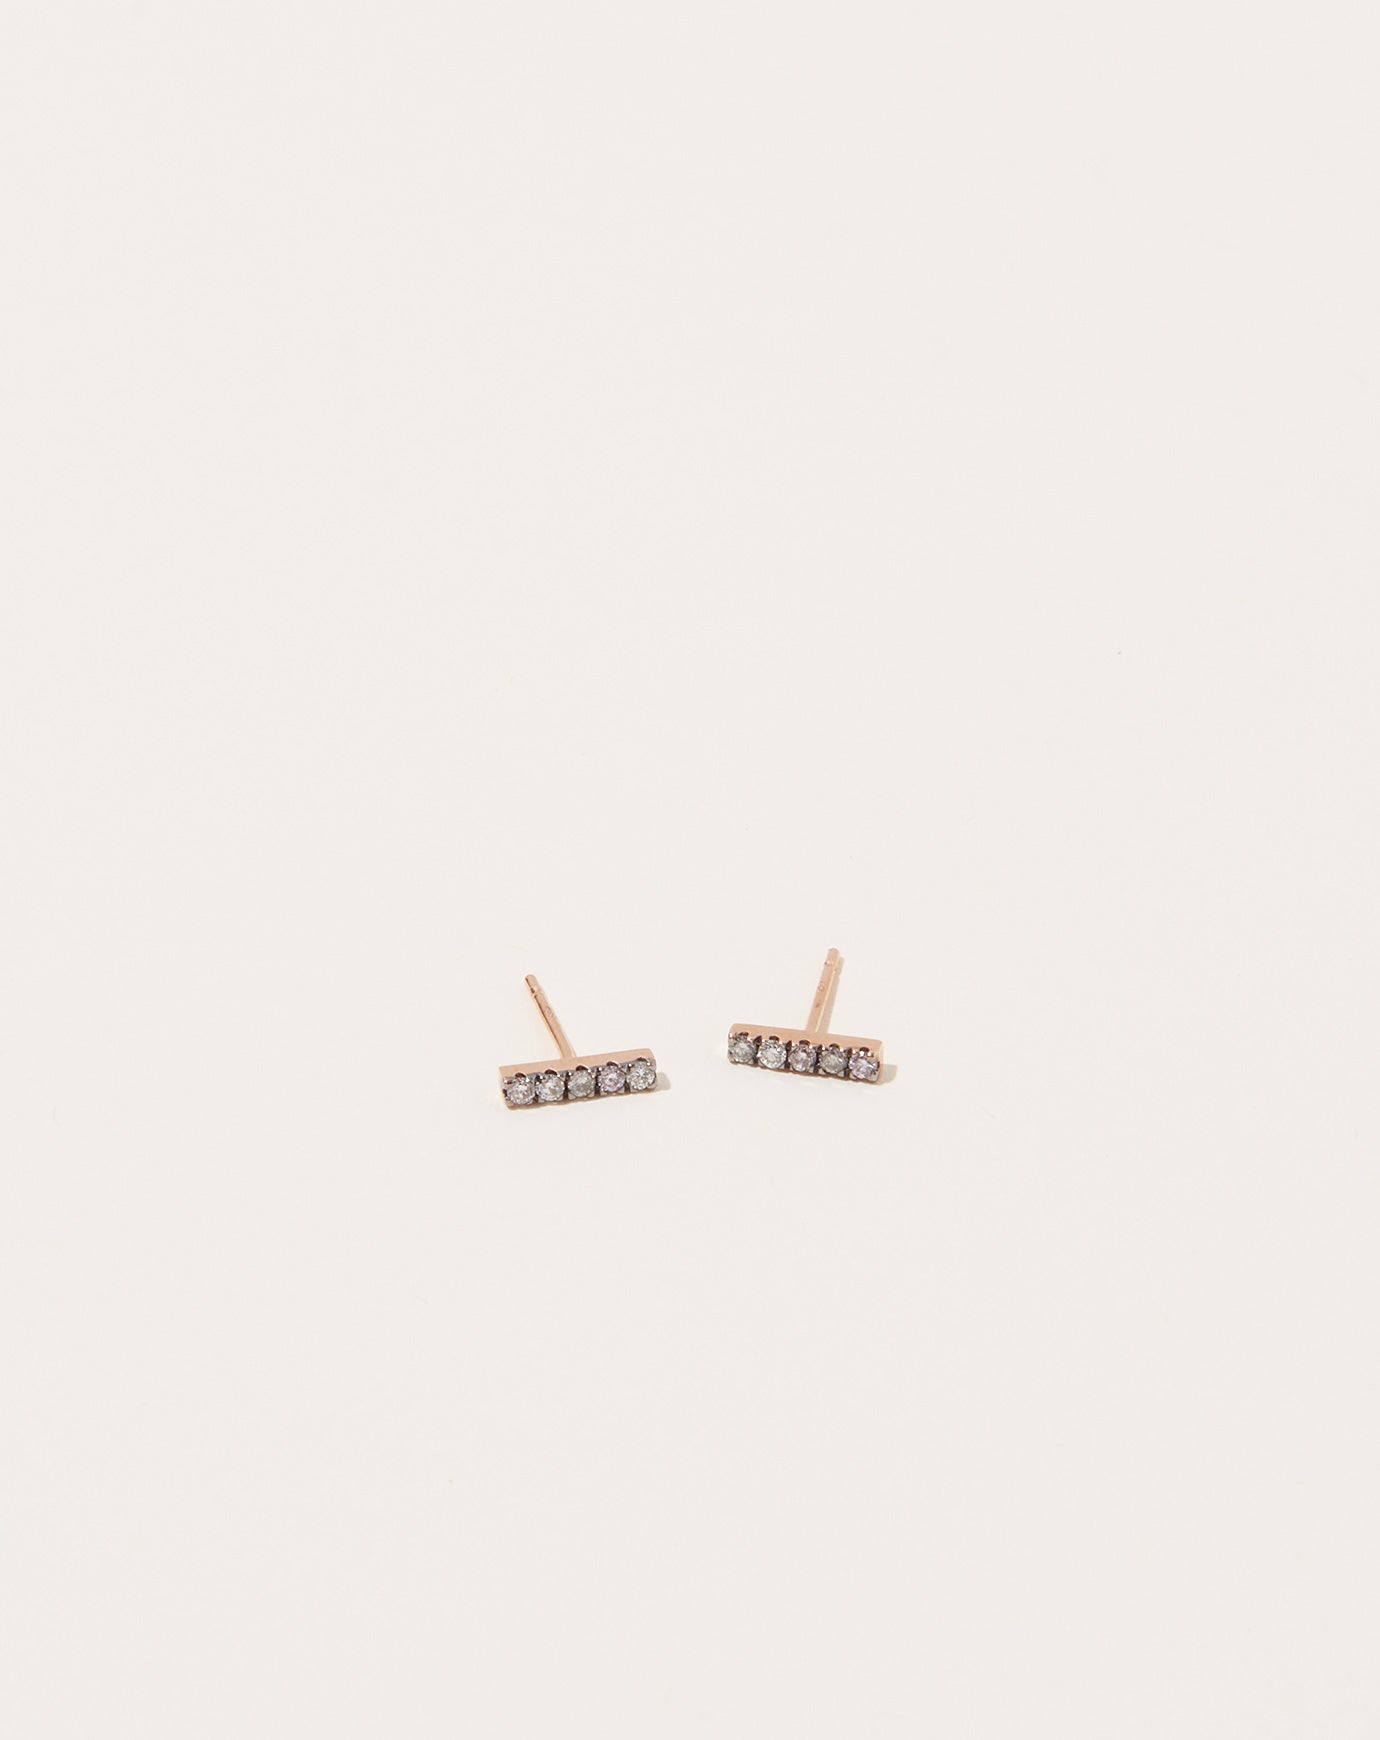 Selin Kent Night Sky Bar Studs with Pink Grey and White Diamonds in 14k Rose Gold